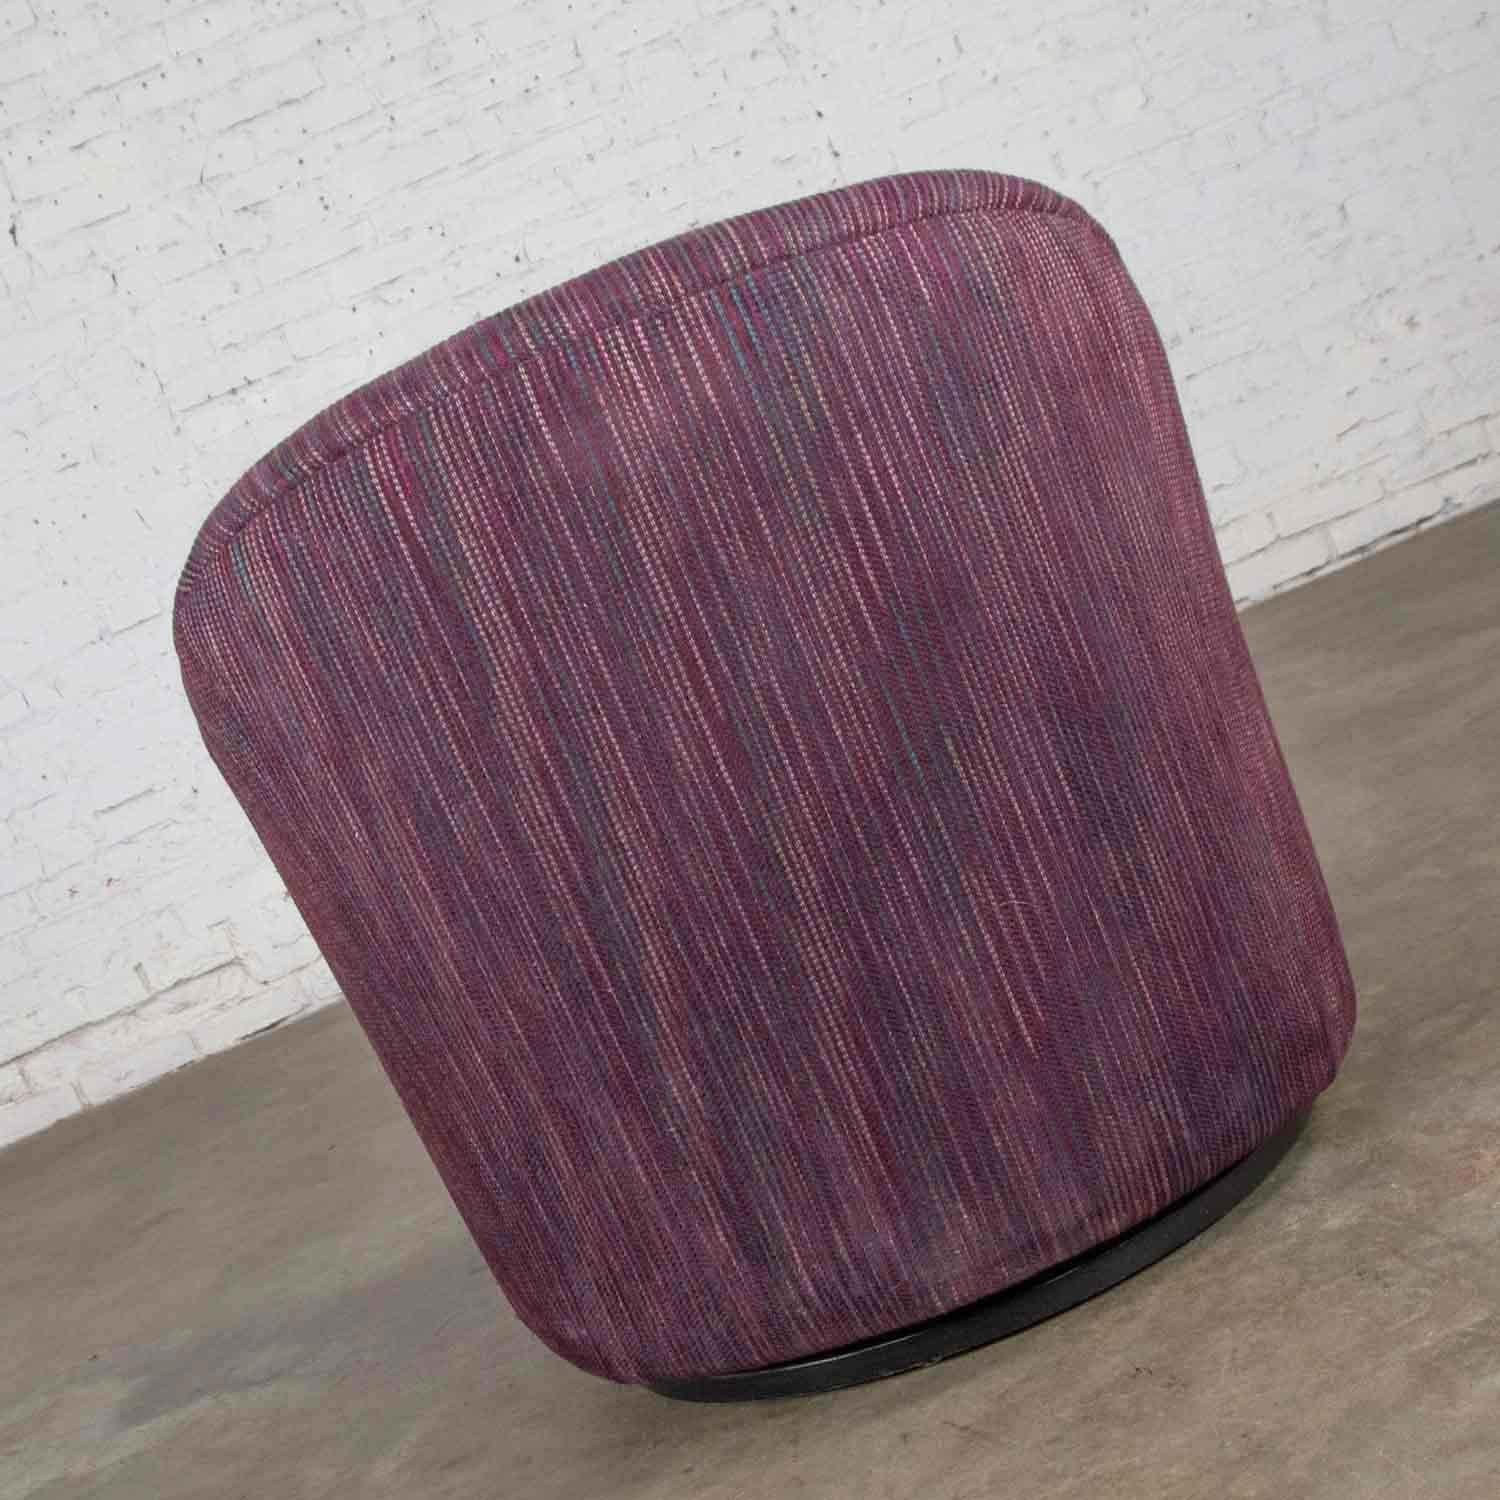 20th Century Vintage Modern Tub Shaped Swivel Rocking Chair in Eggplant Purple Upholstery